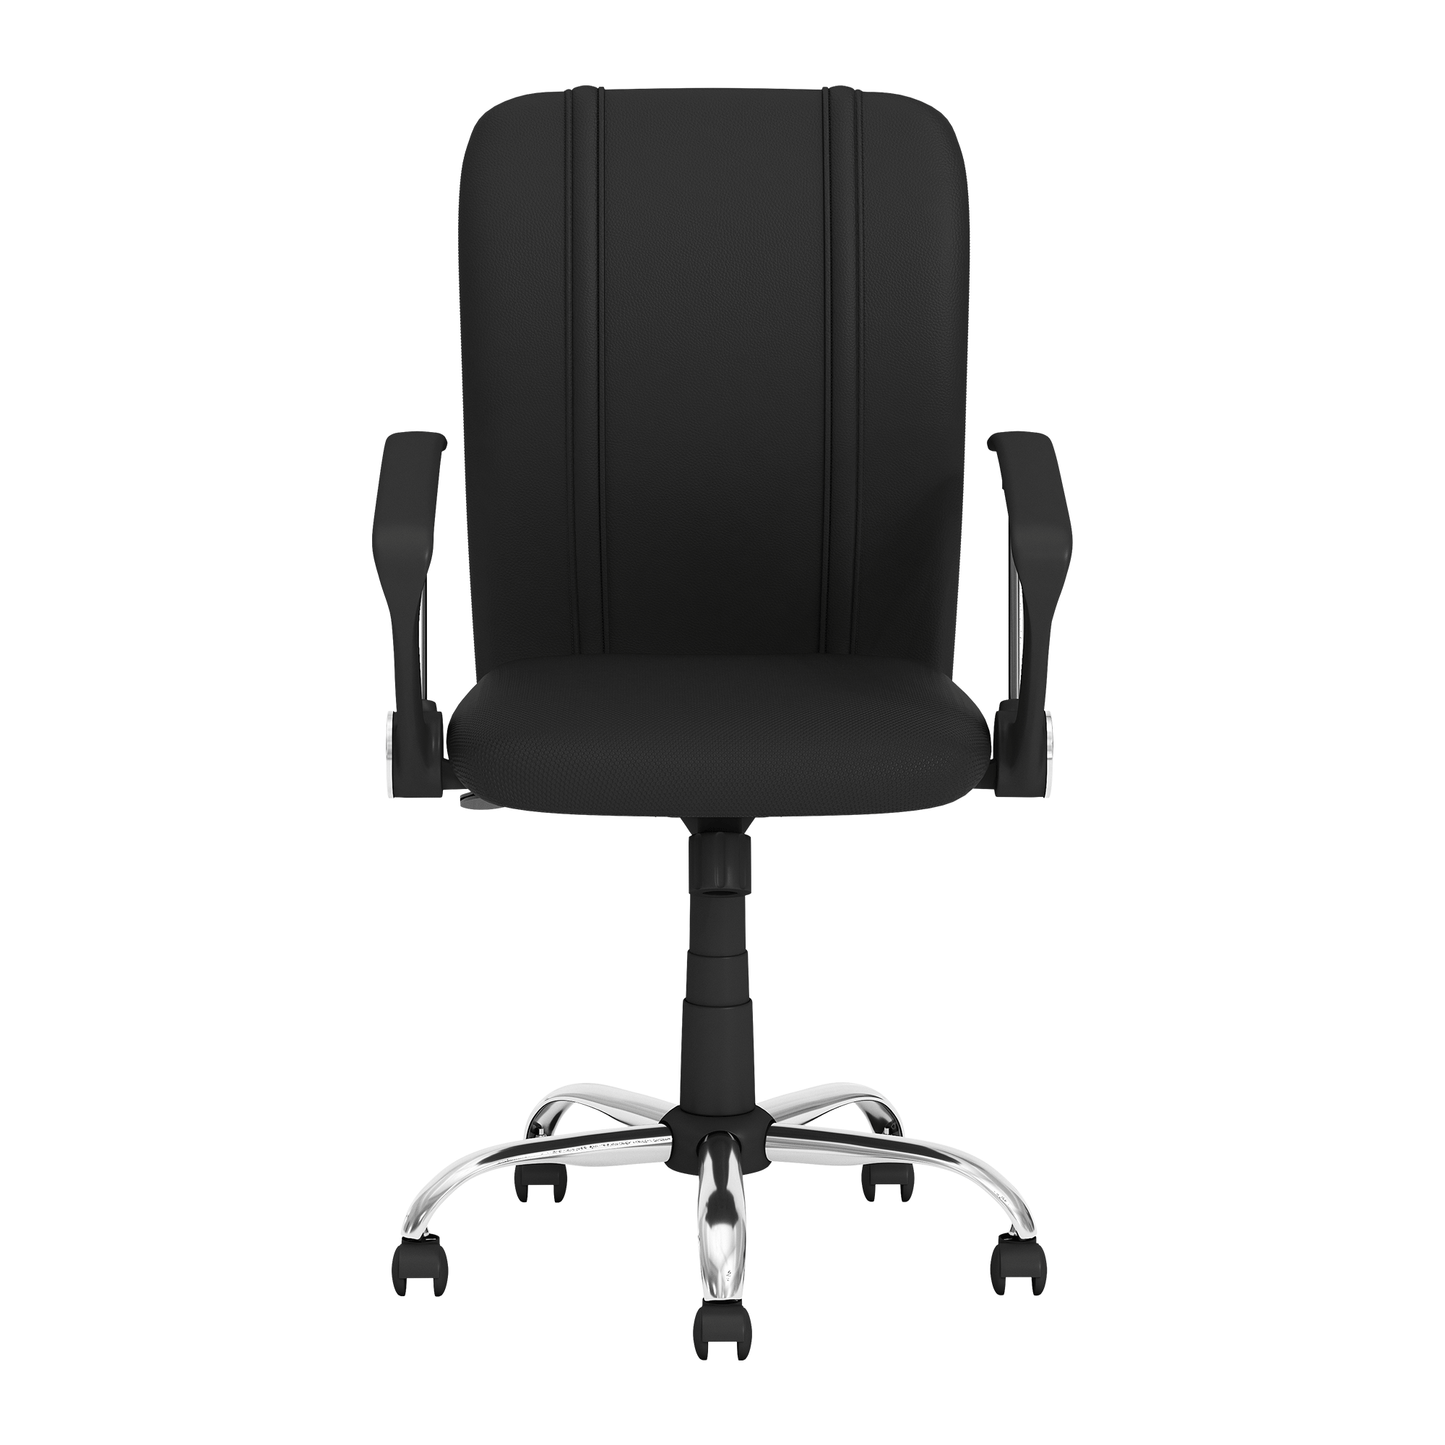 Curve Task Chair with Arizona Coyotes Secondary Logo